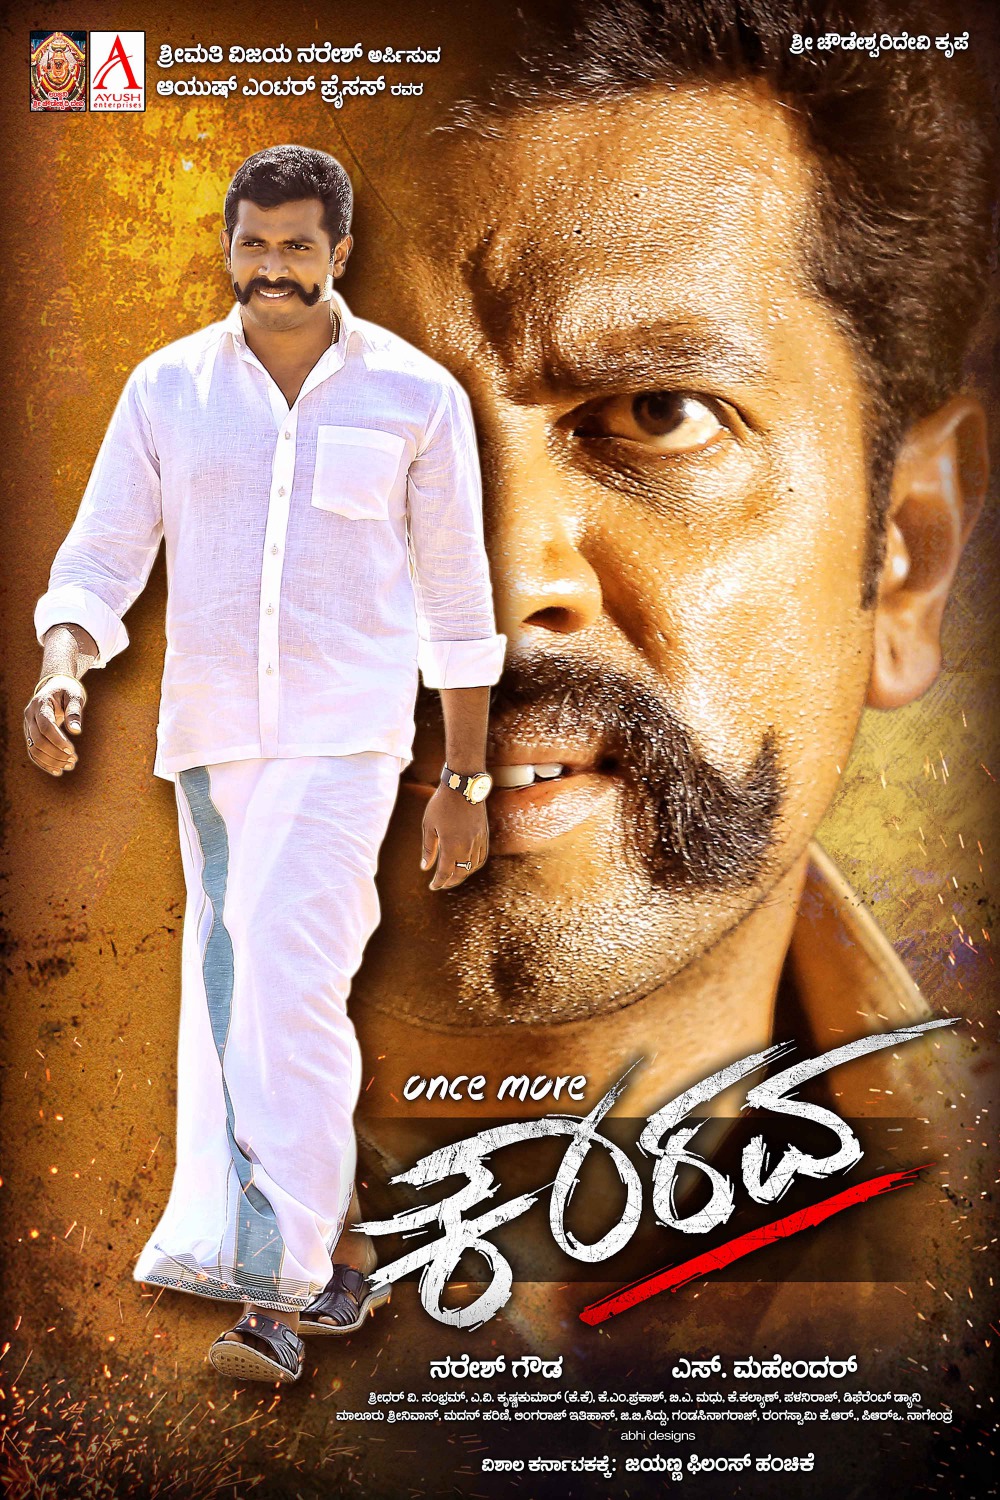 Extra Large Movie Poster Image for Once More Kaurava (#16 of 20)